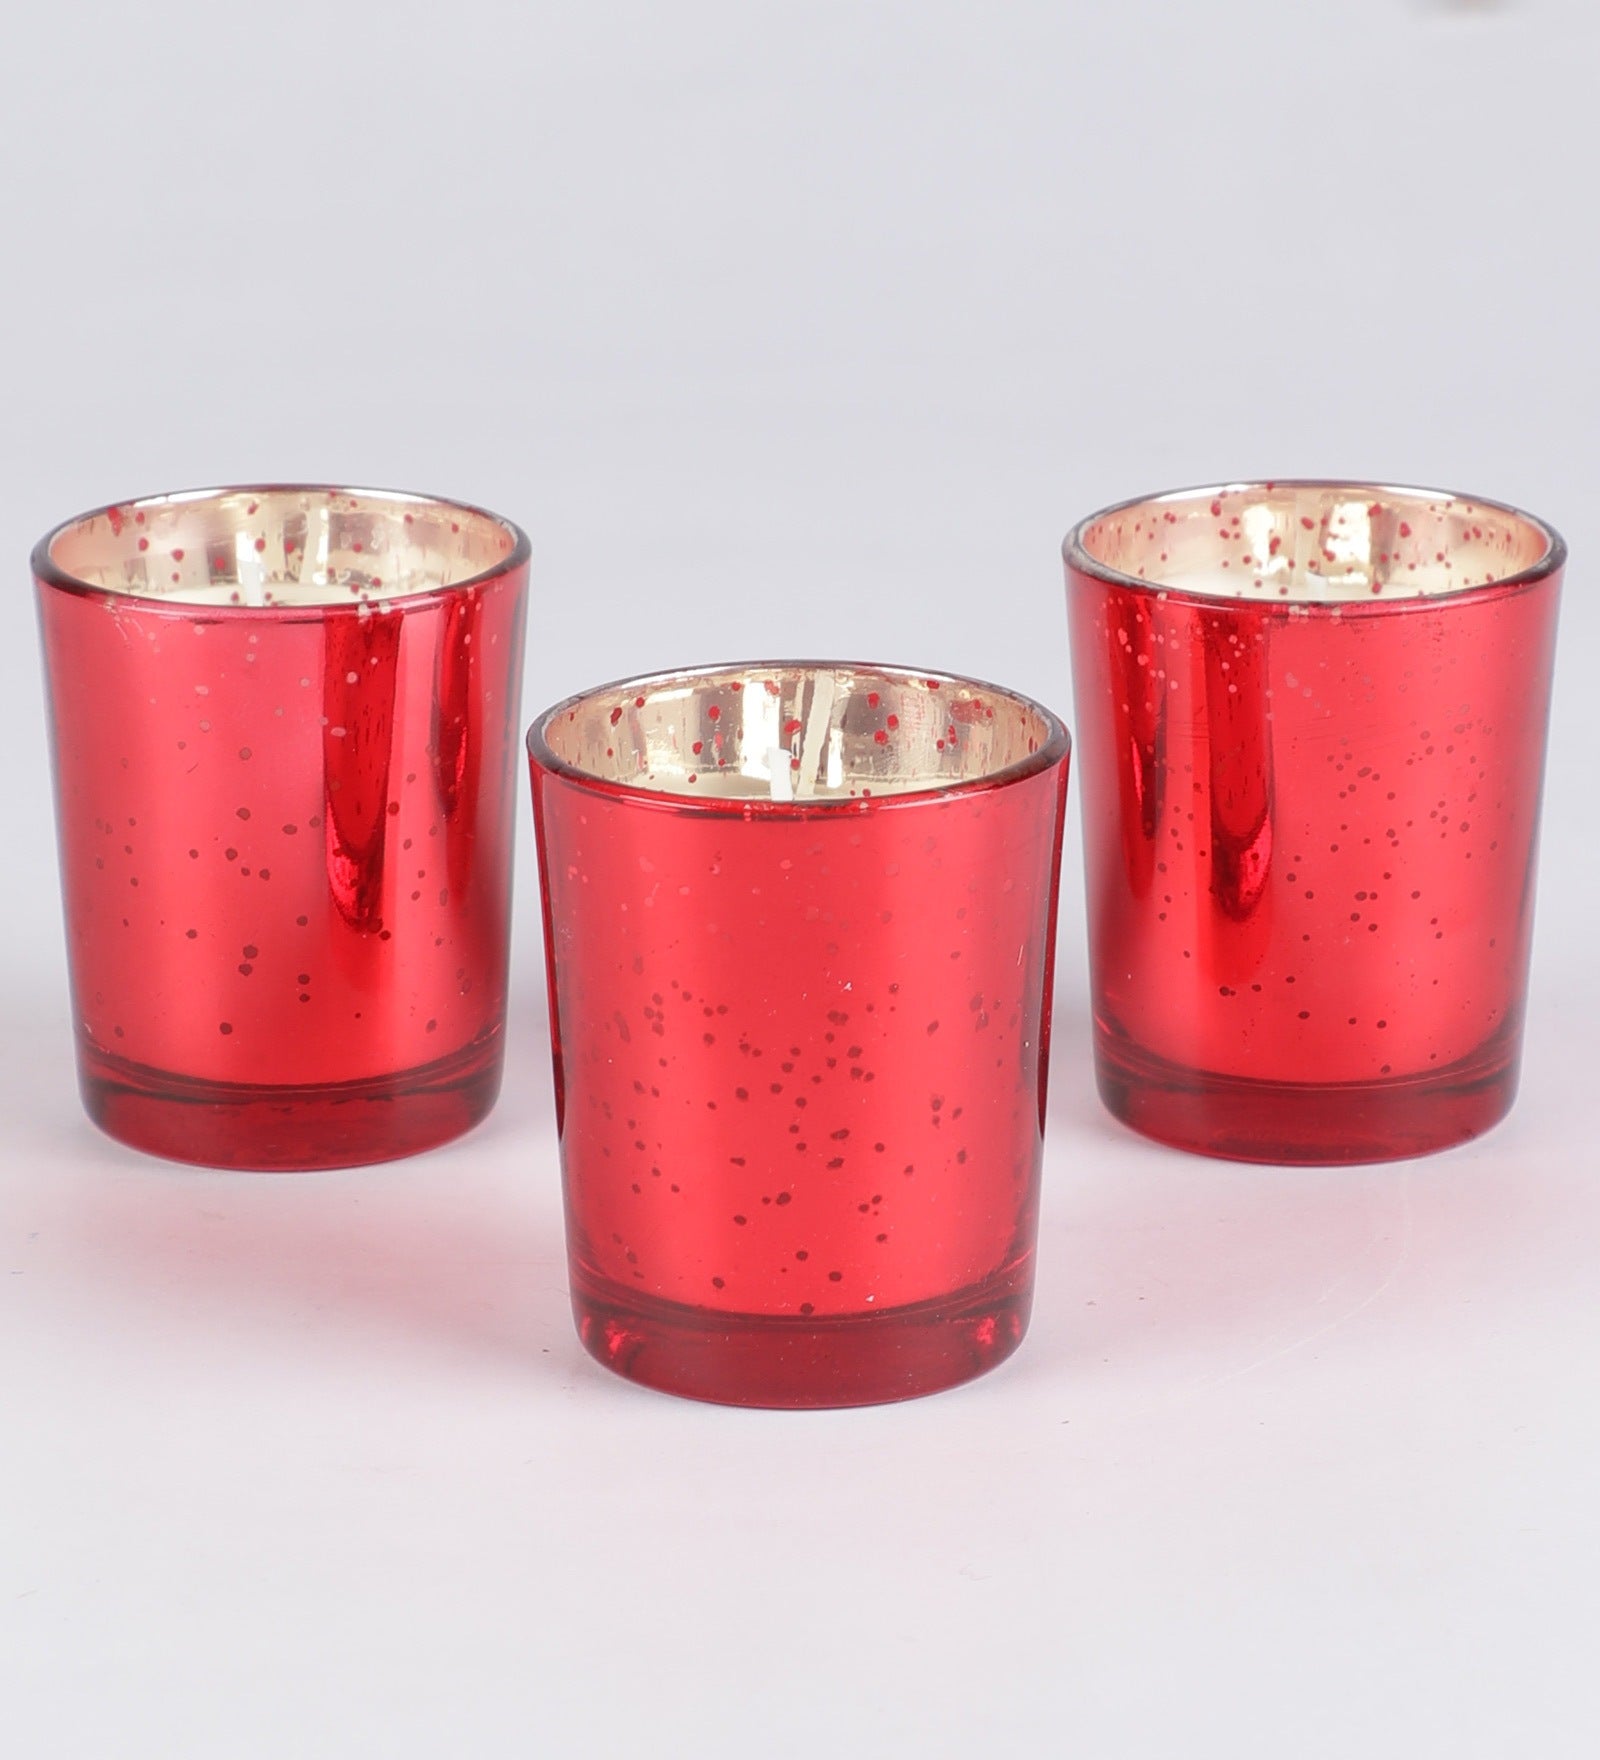 Hosley Set 3 Fragrance Metallic Red Glass Candle for Decoration